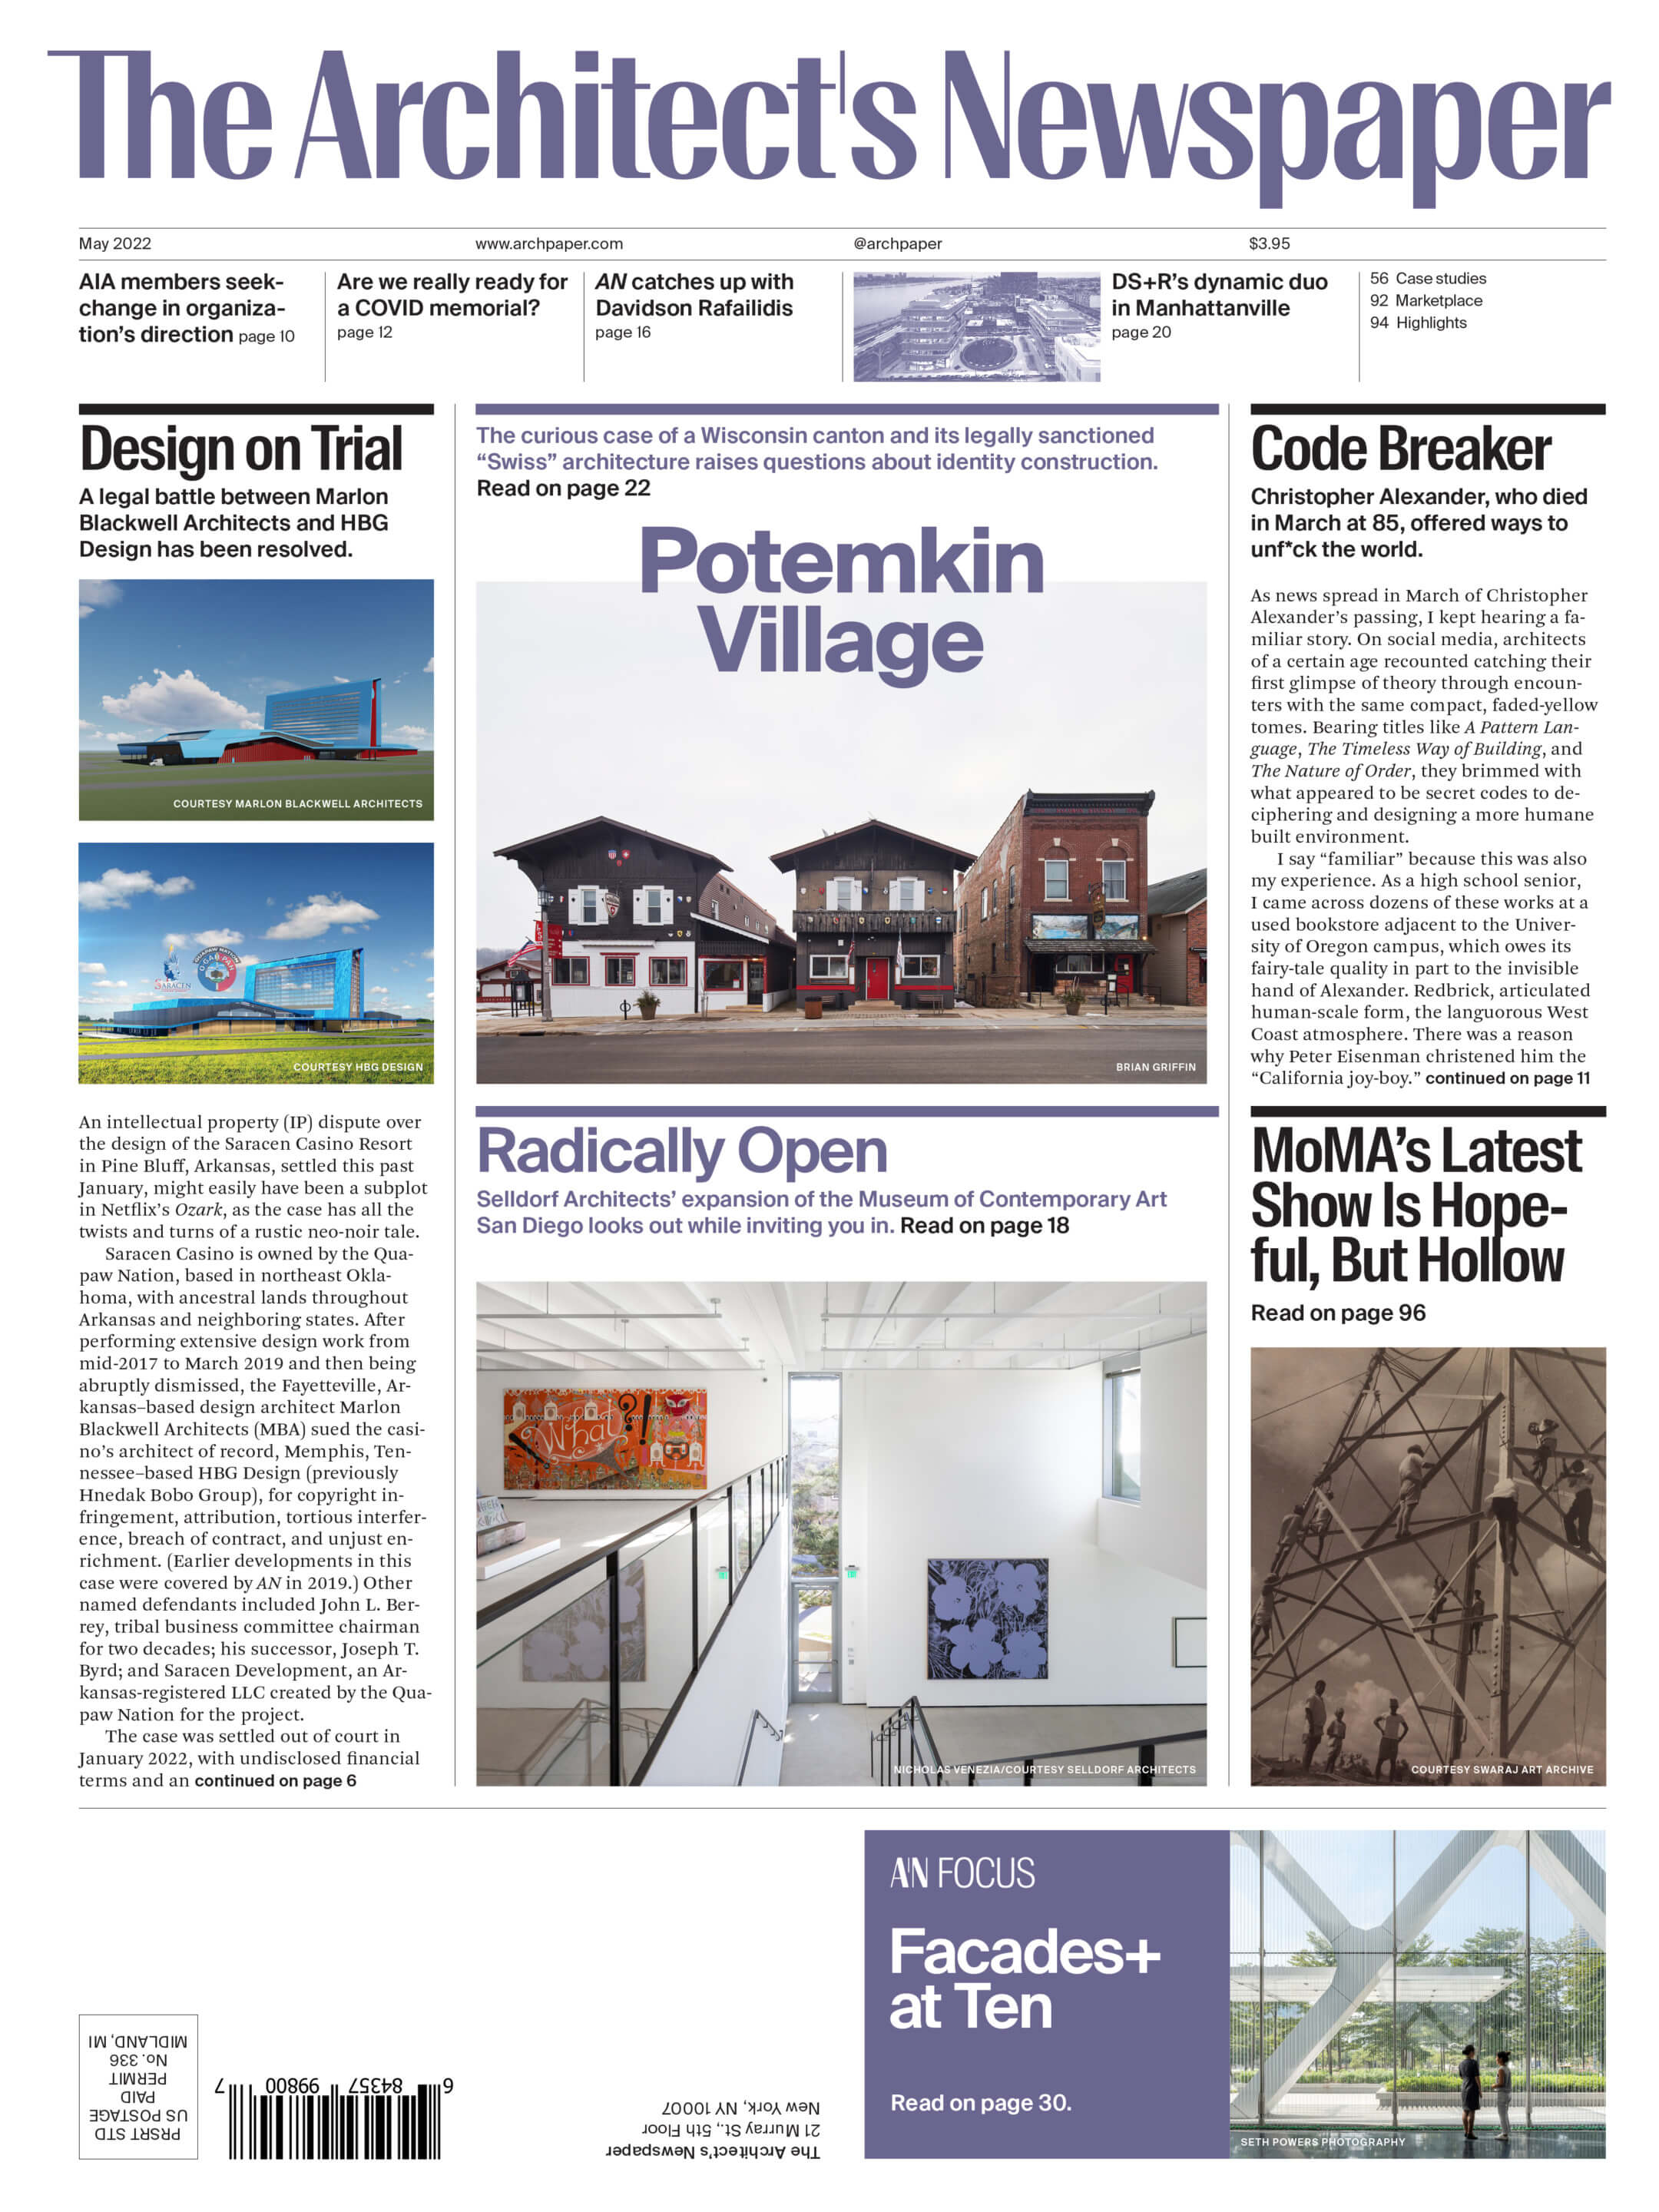 cover of newspaper with images of buildings